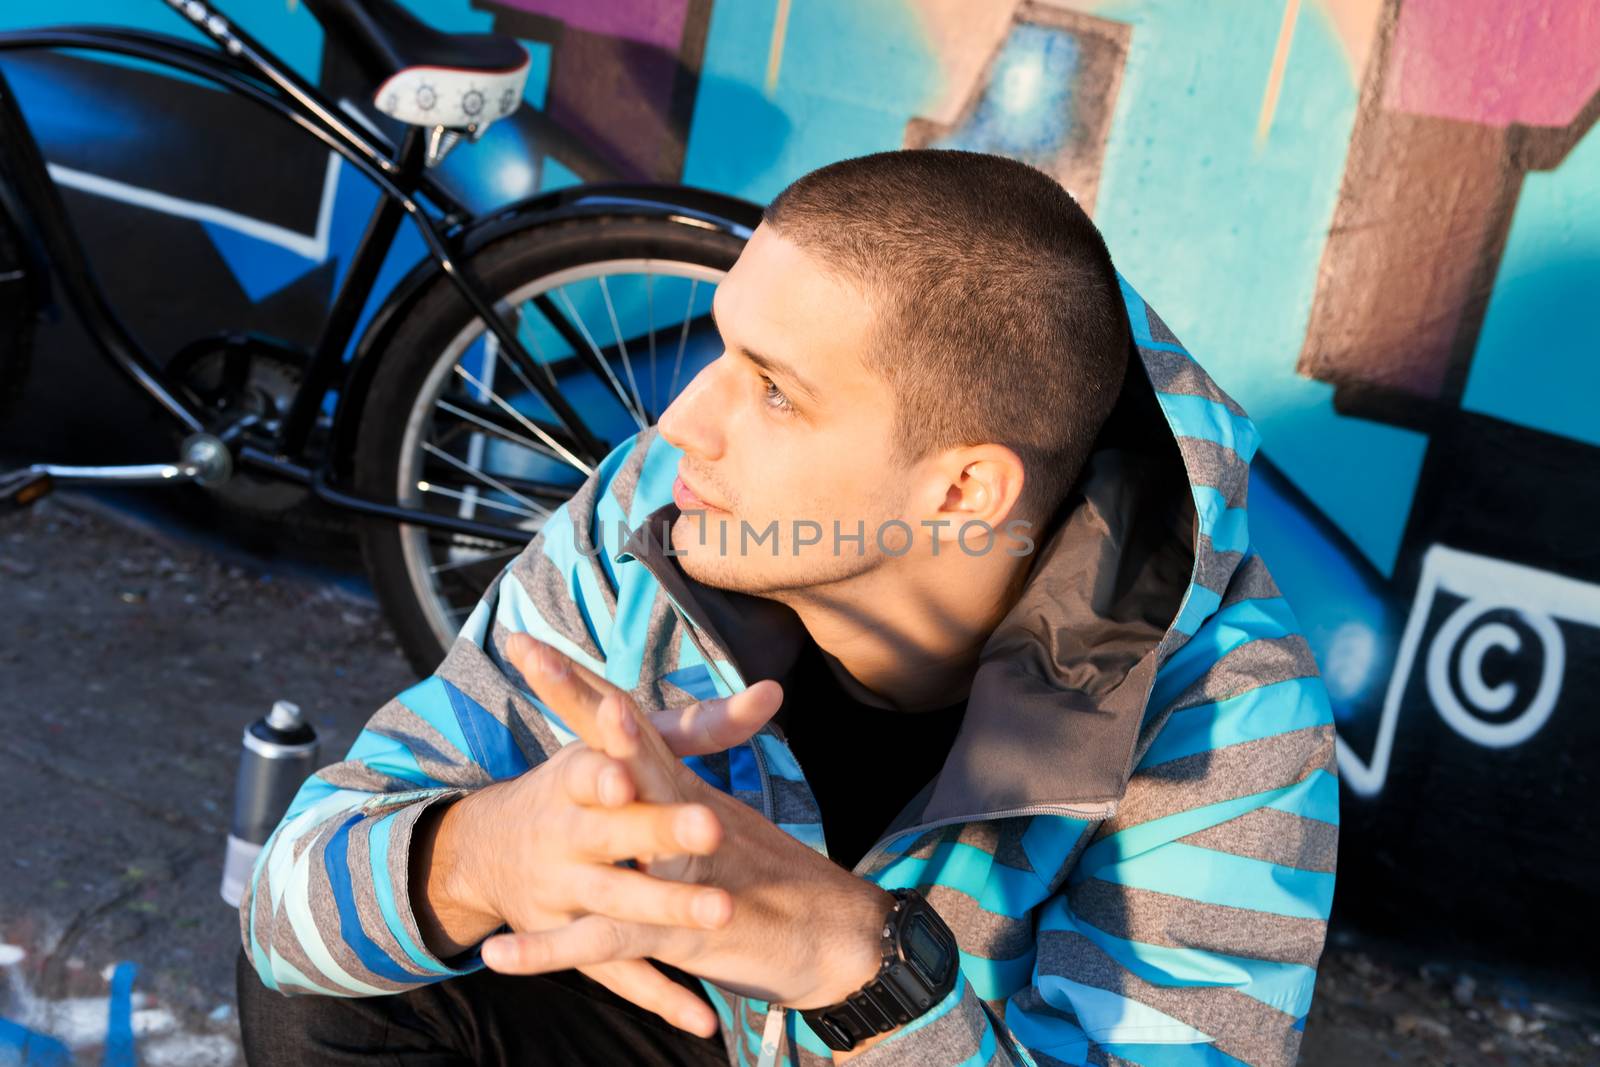 Young male graffiti artist sitting in front of finished piece on wall with city cruiser bike leaning next to him. Urban culture.